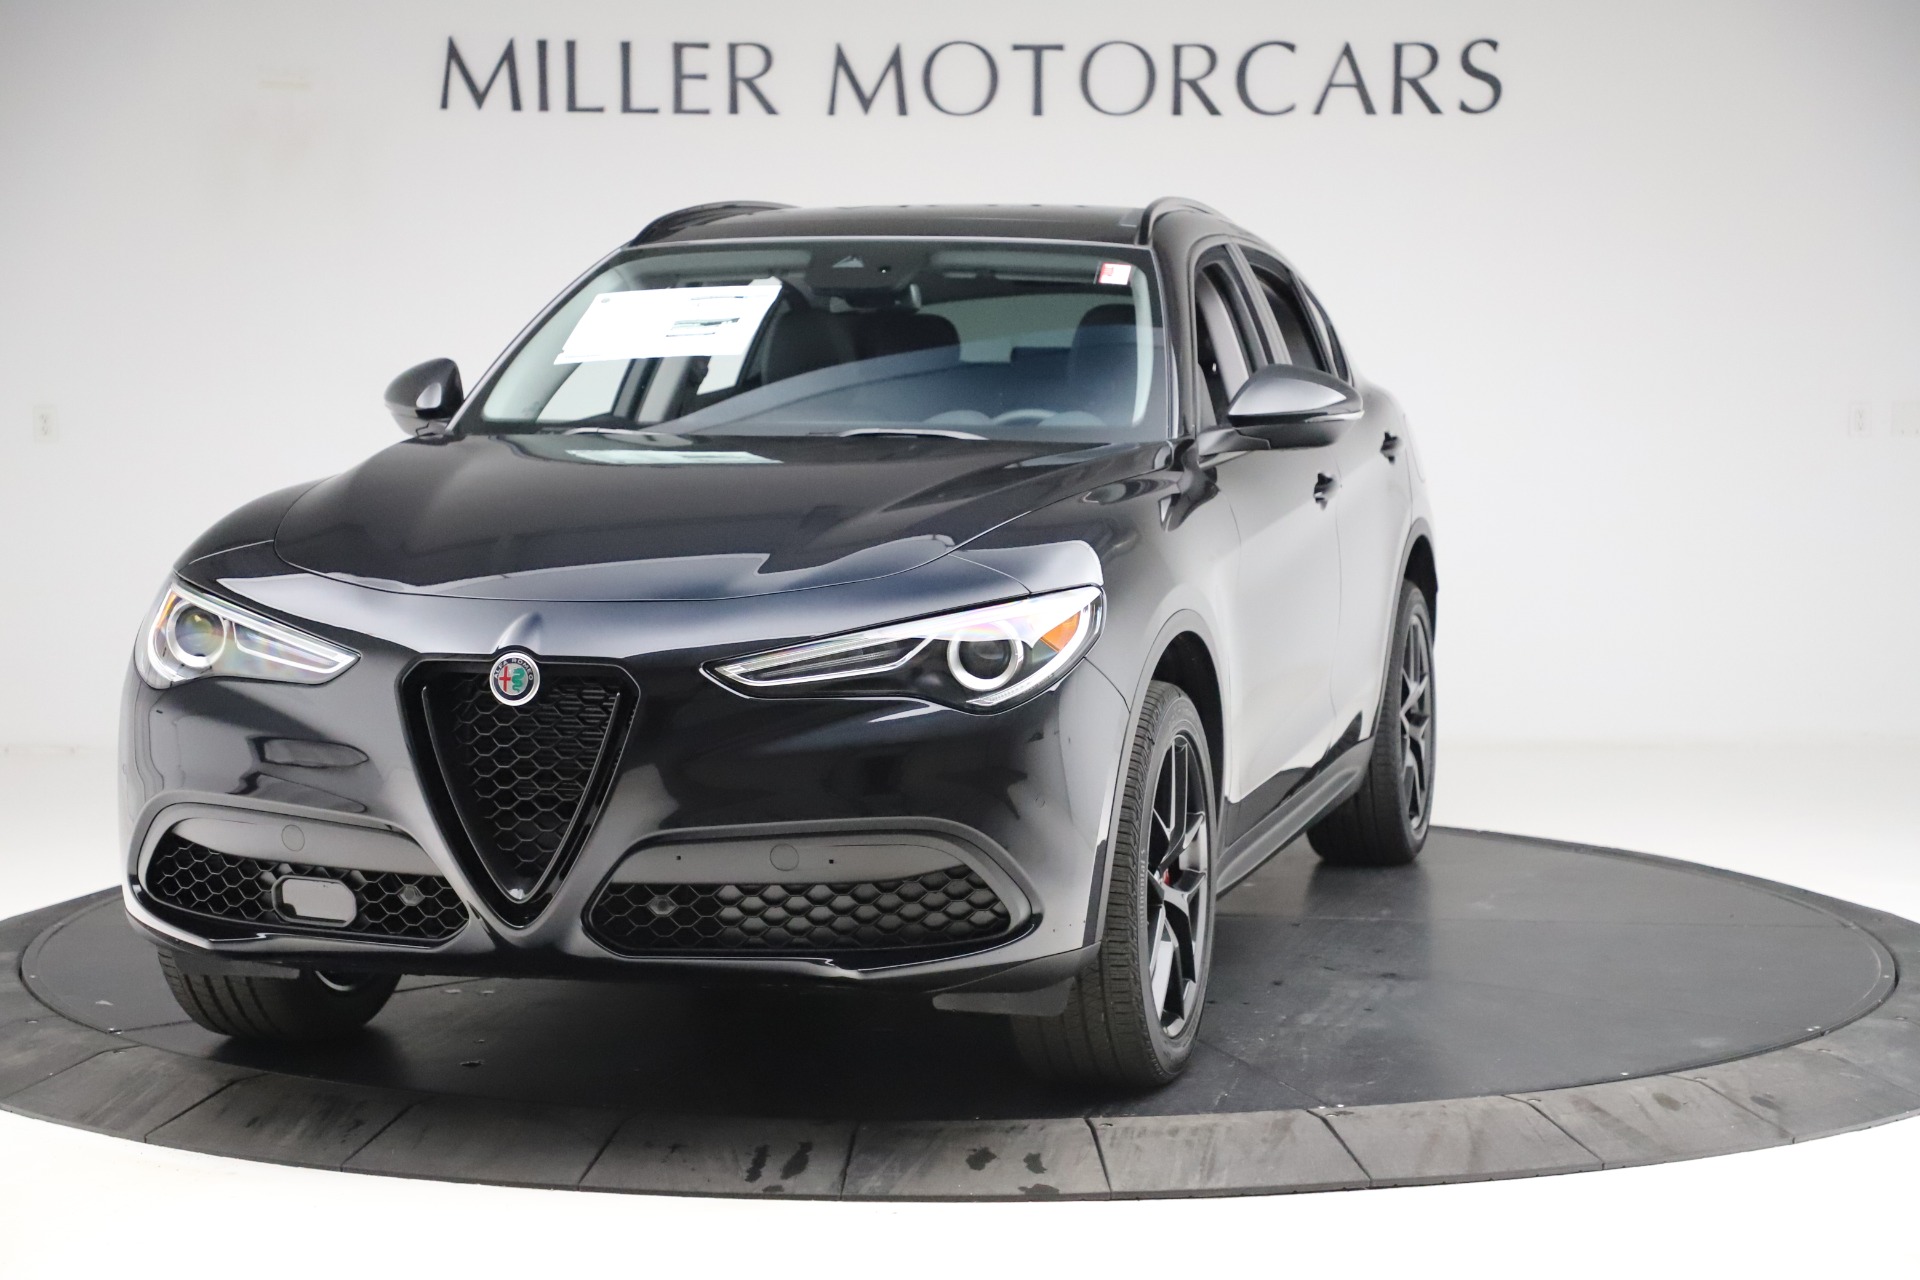 New 2020 Alfa Romeo Stelvio Q4 for sale Sold at Rolls-Royce Motor Cars Greenwich in Greenwich CT 06830 1